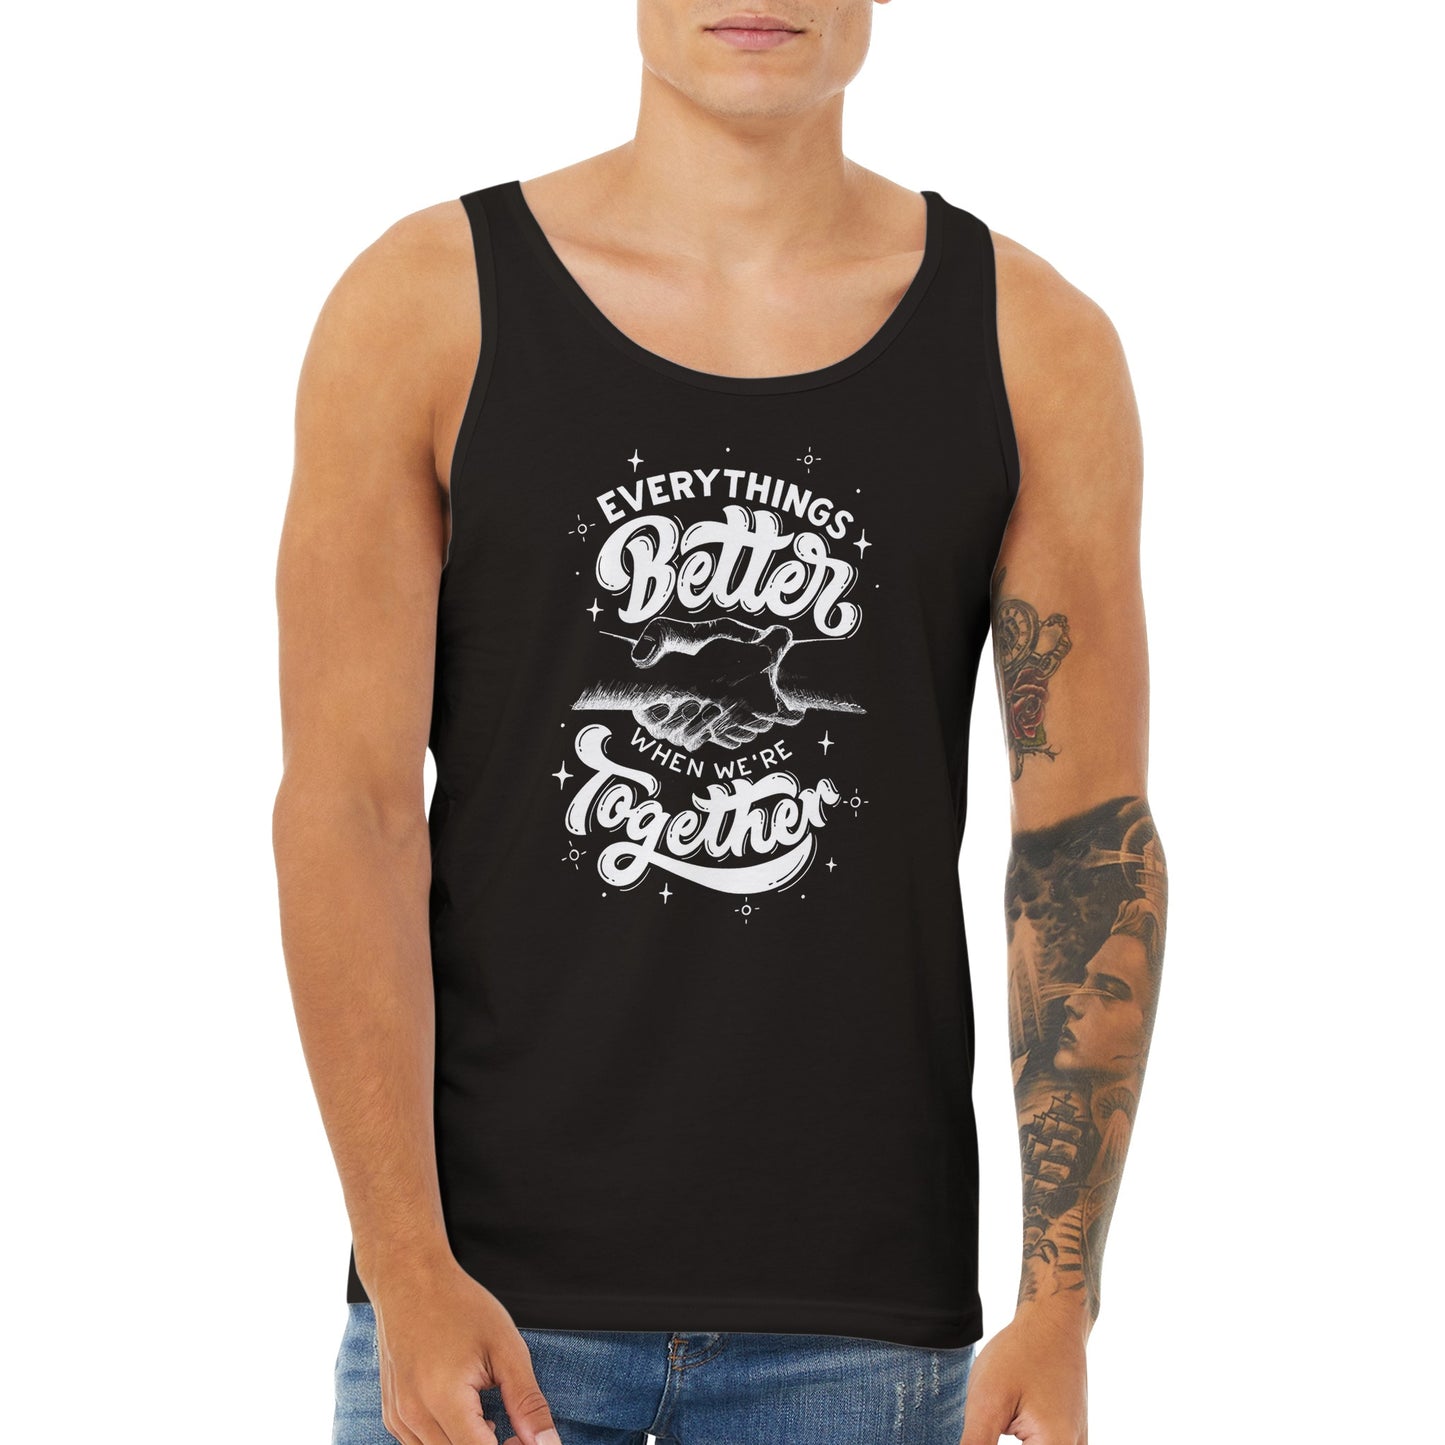 Every Thing's Better When We're Together- Inspirational Quote Premium Unisex Tank Top